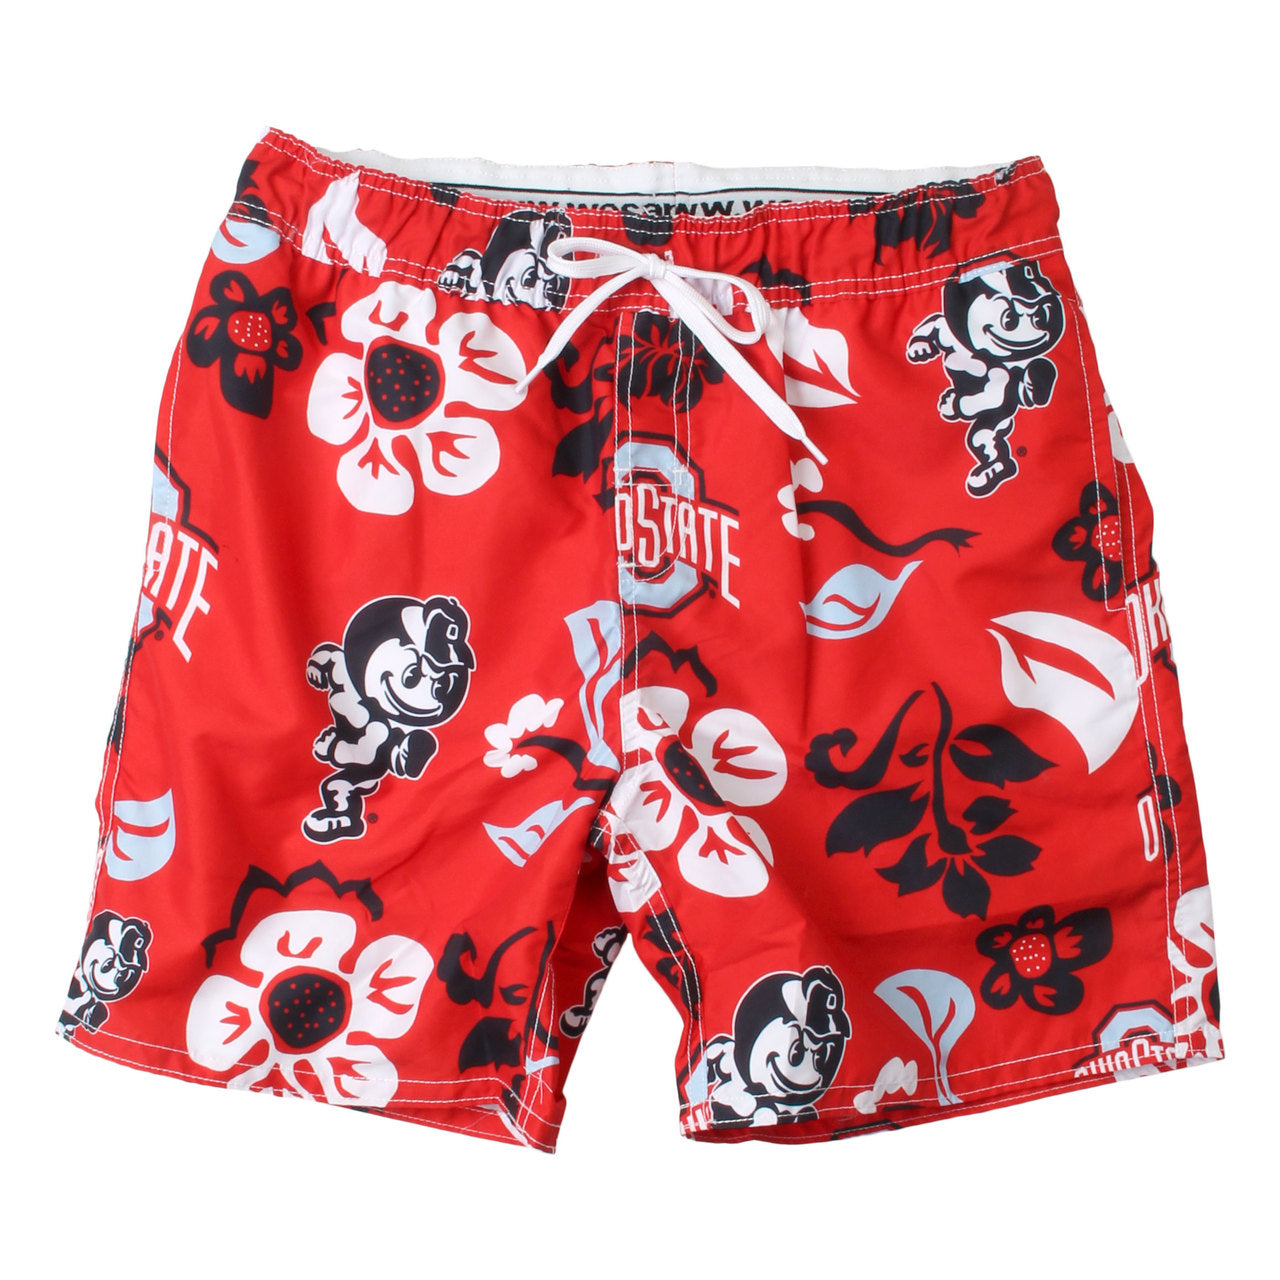 Wes & Willy Ohio State Buckeyes Men's Floral Swim trunks